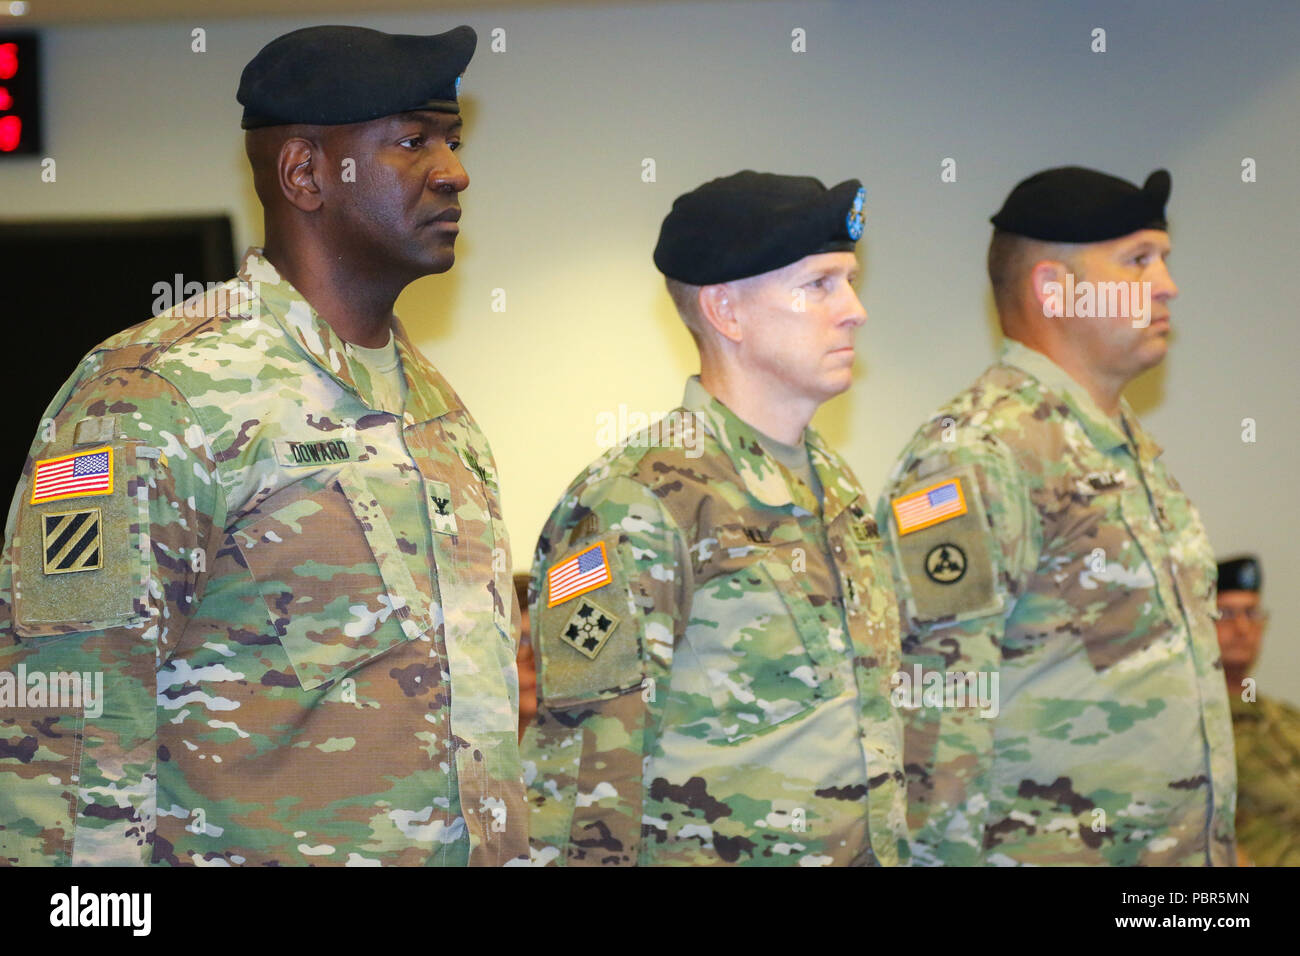 Col. Oscar W. Doward Jr., outgoing commander of the 2503rd Digital Liaison Detachment, Maj. Gen. David C. Hill, deputy commanding general, U.S. Army Central, and Col. Douglas W. Mills, incoming commander of the 2503rd DLD, stand at attention during a change-of-command ceremony July 19, 2018, at Patton Hall on Shaw Air Force Base, S.C. (U.S. Army photo by Sgt. Von Marie Donato) Stock Photo